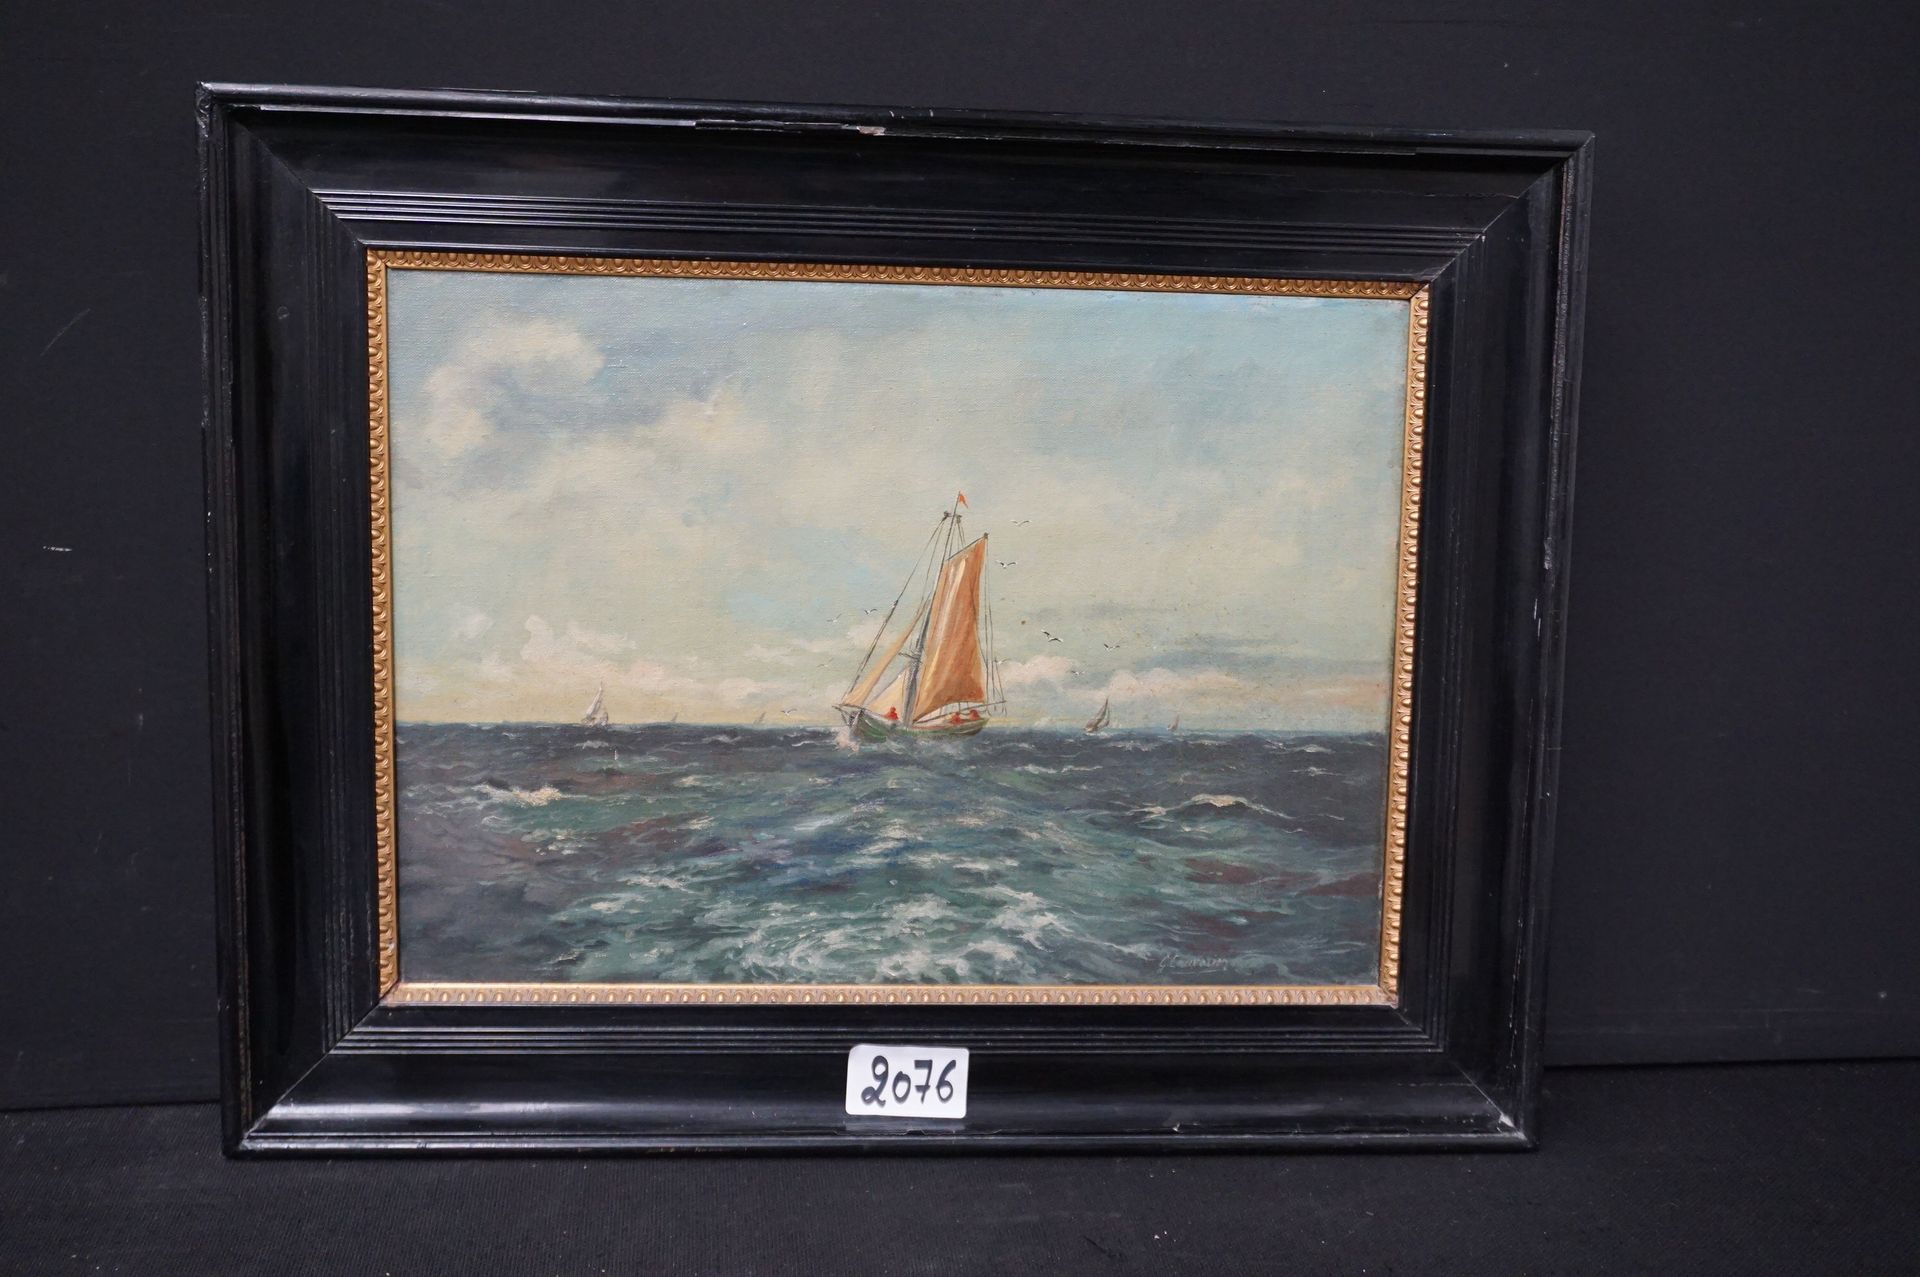 Null Painting - "Marine" - Oil on canvas - Signed - 38 x 53 cm